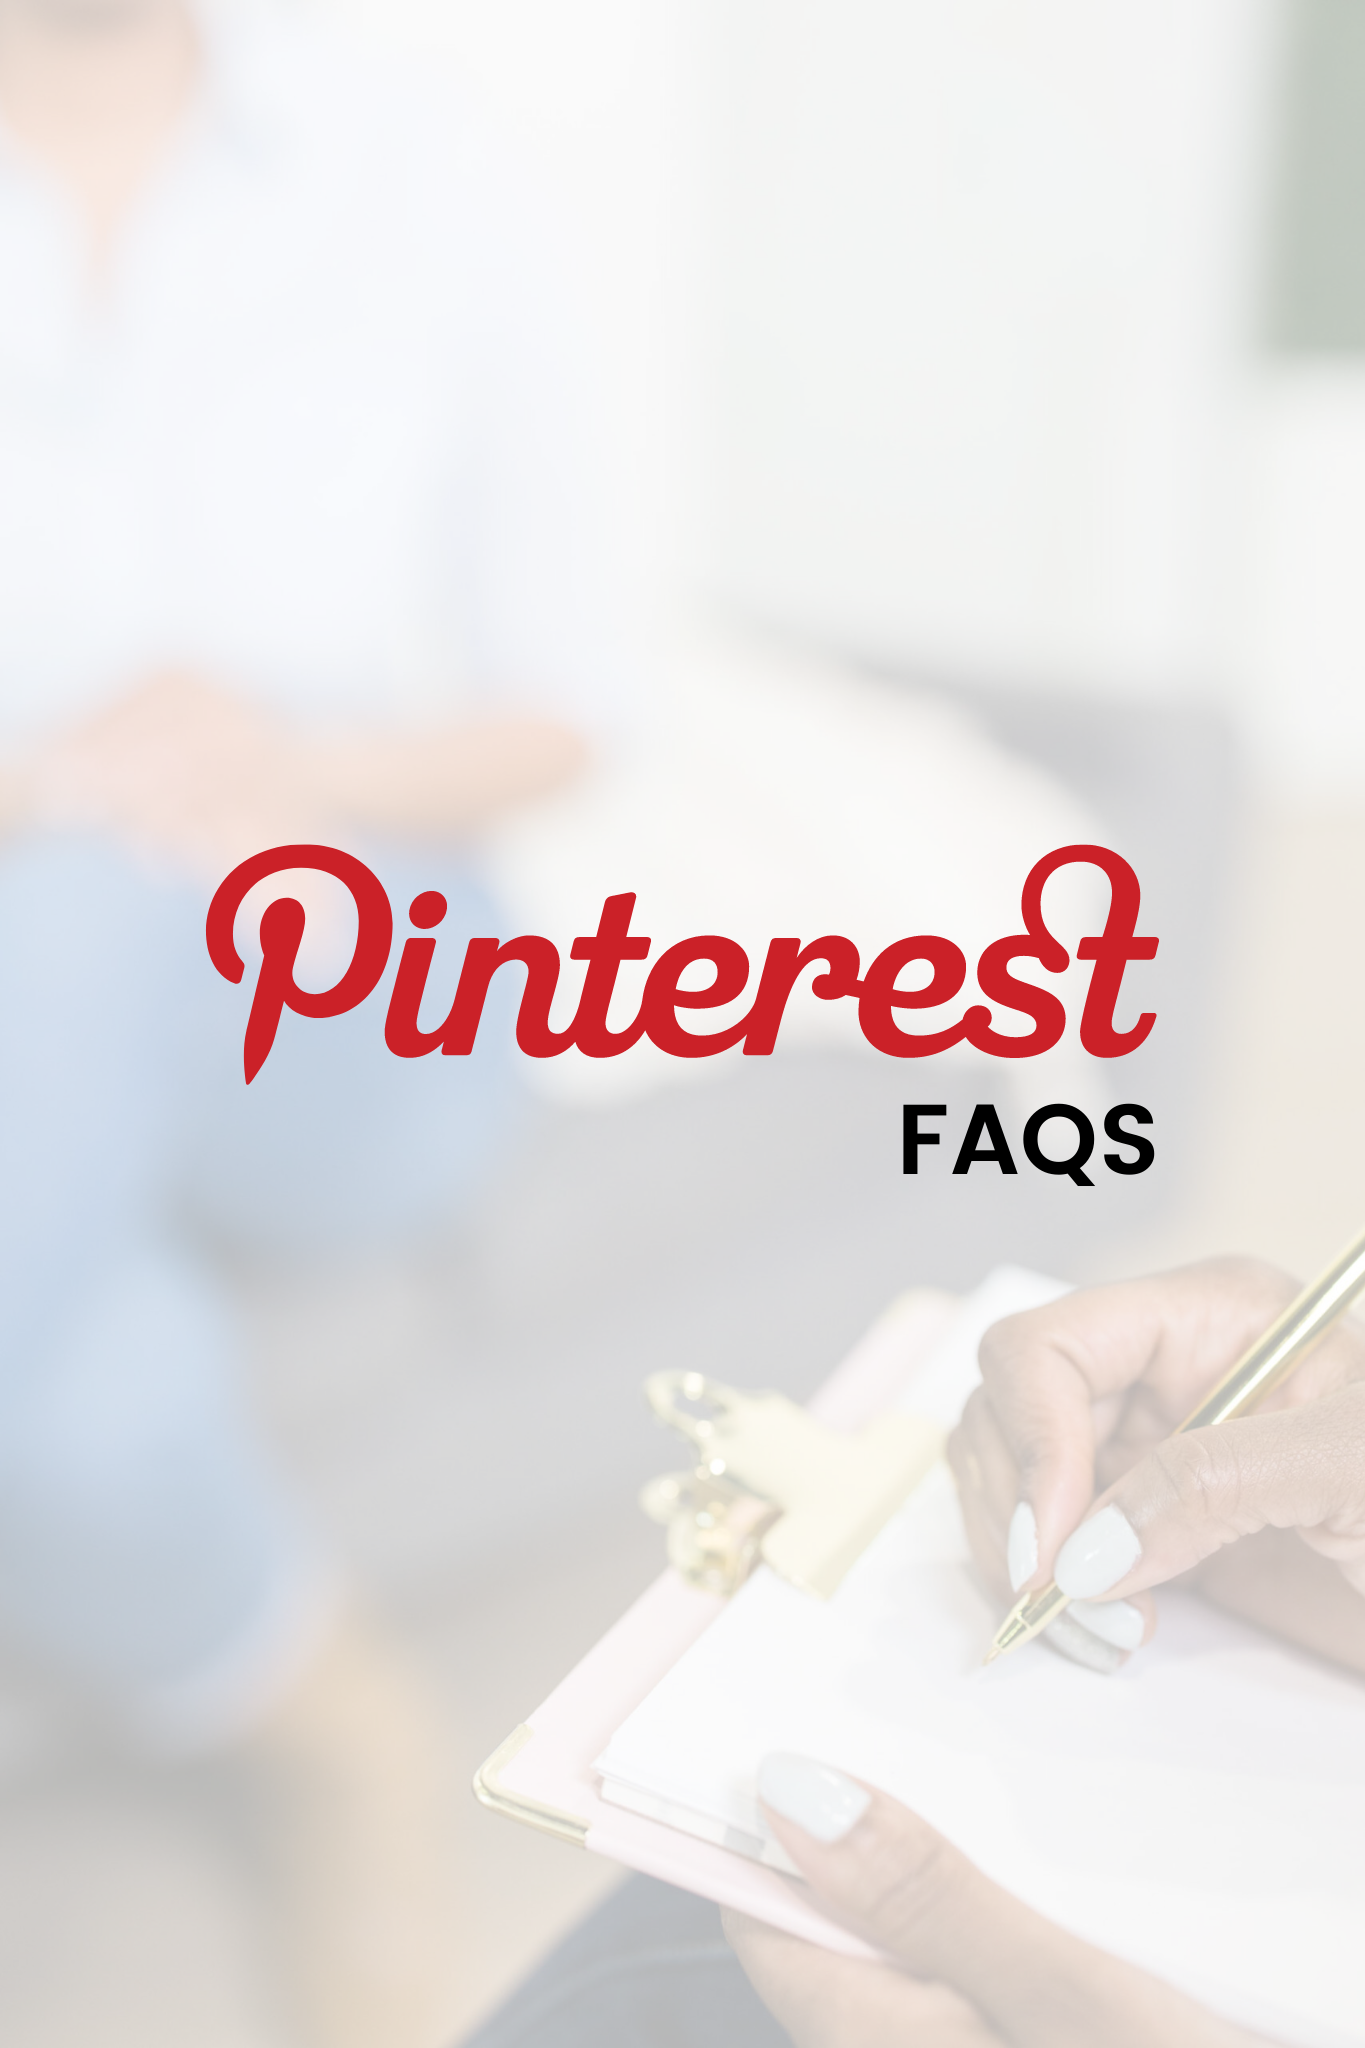 Pinterest FAQs: 15 Common Questions + Their Answers - Mckayla S. Pinterest and Blog SEO Strategist